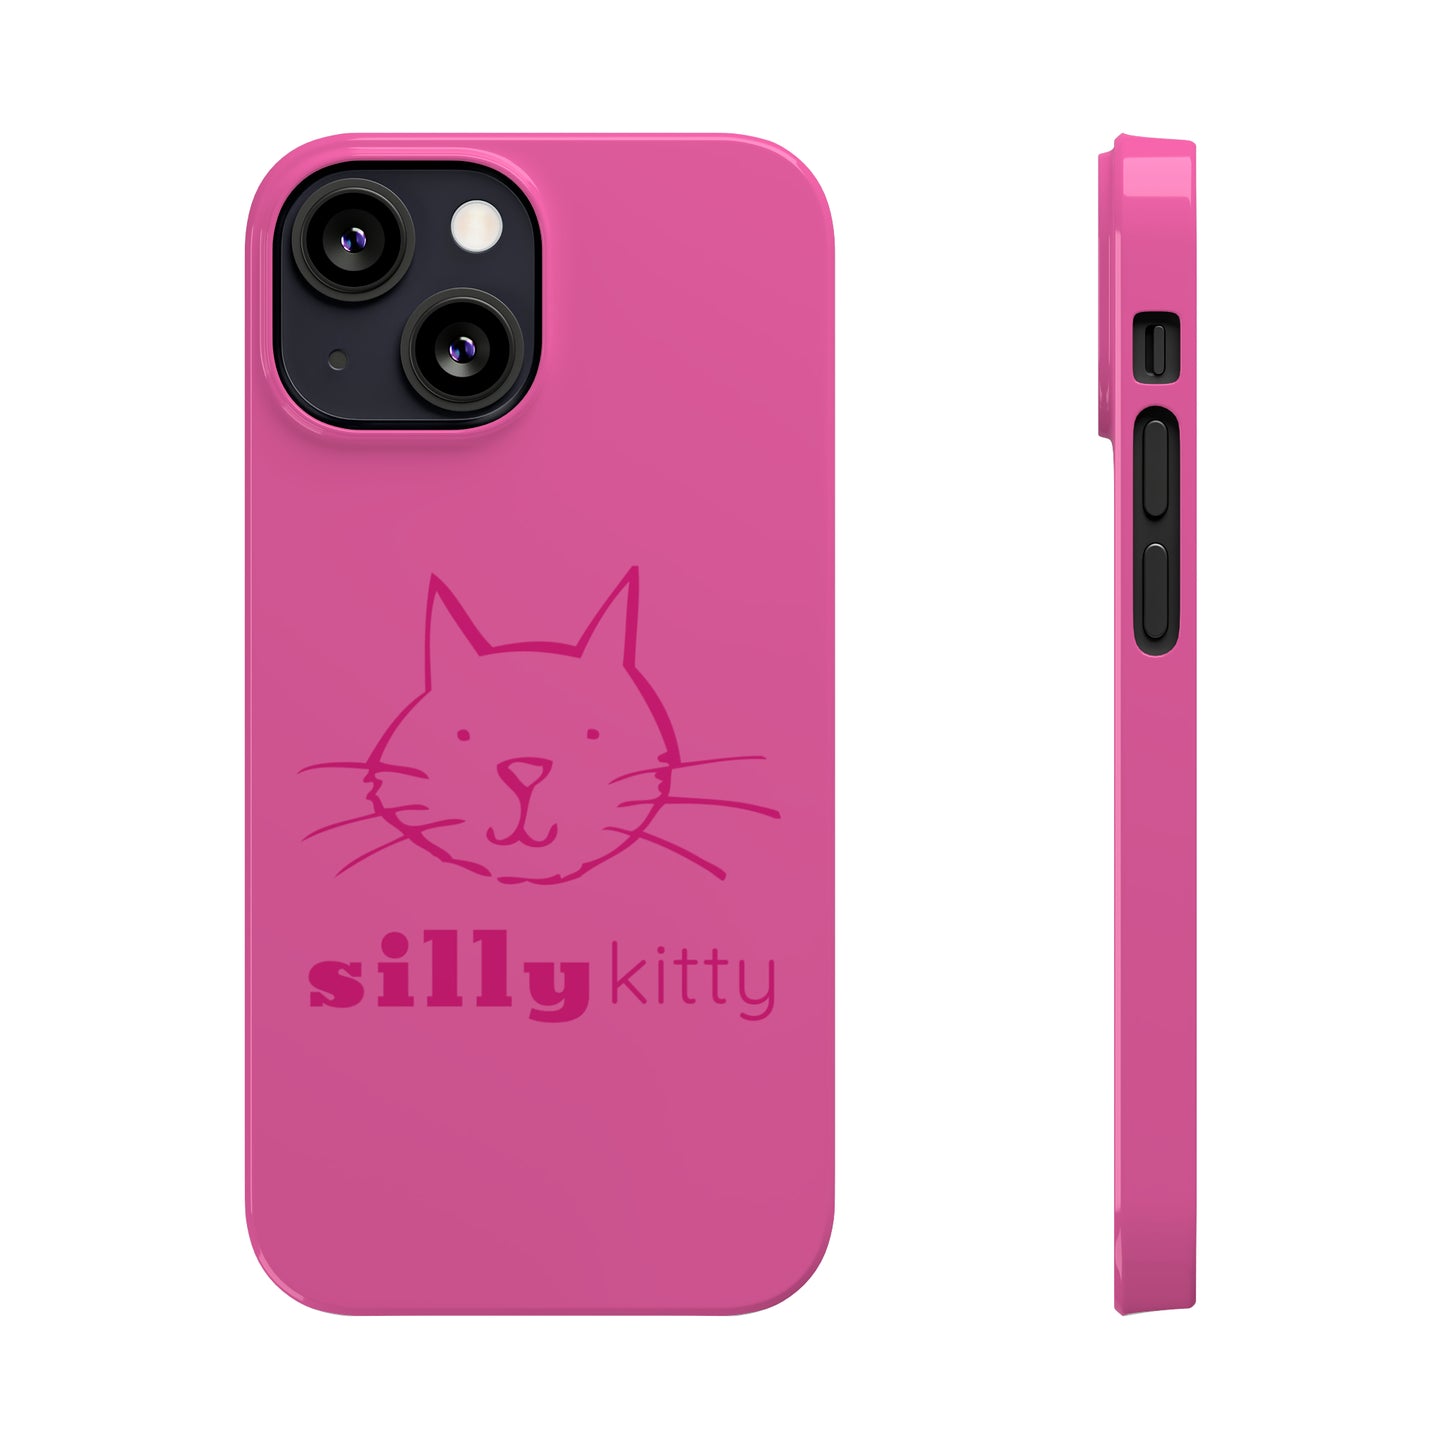 Silly Kitty Slim Phone Cases